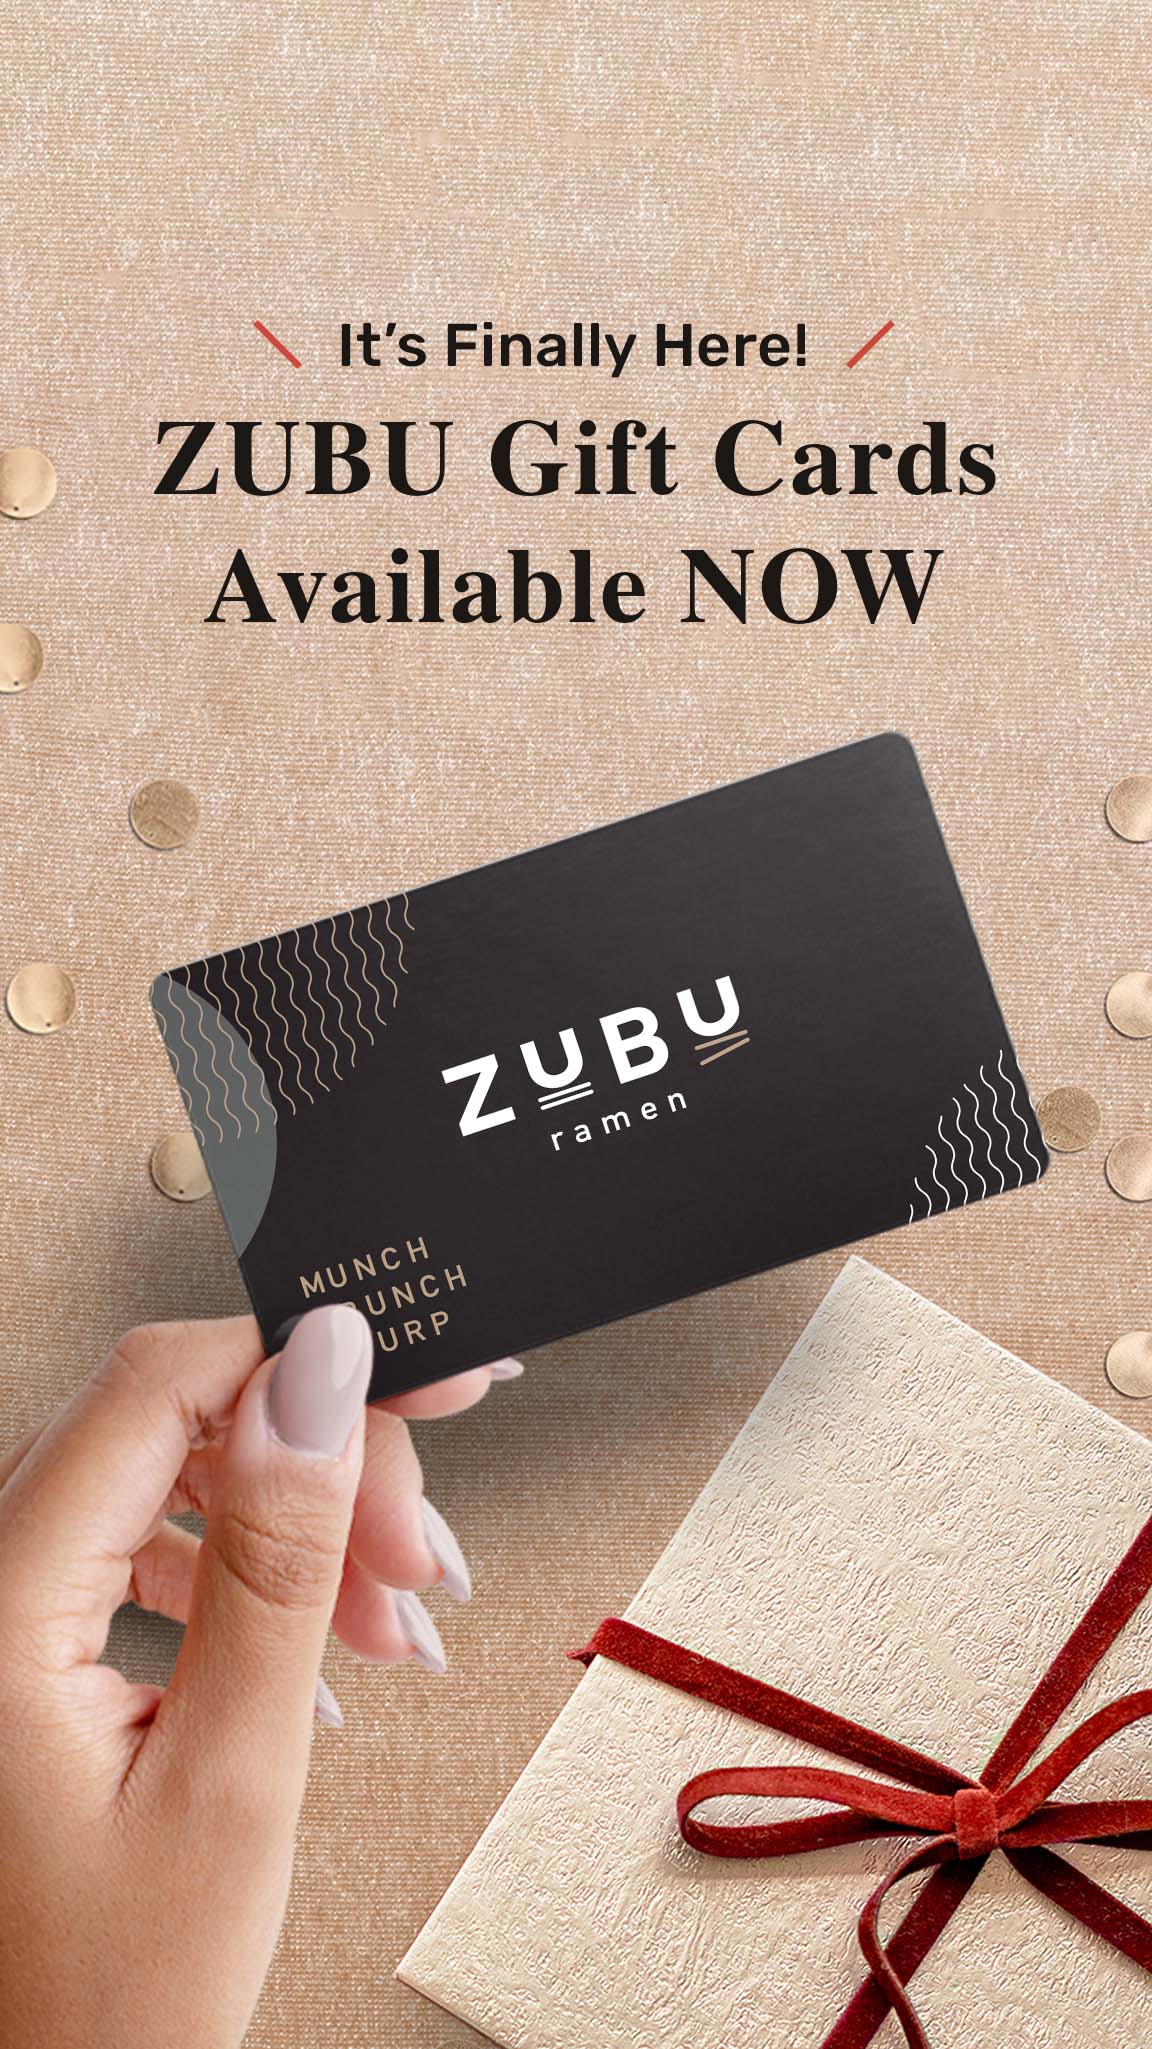 ZUBU Gift Cards Available NOW